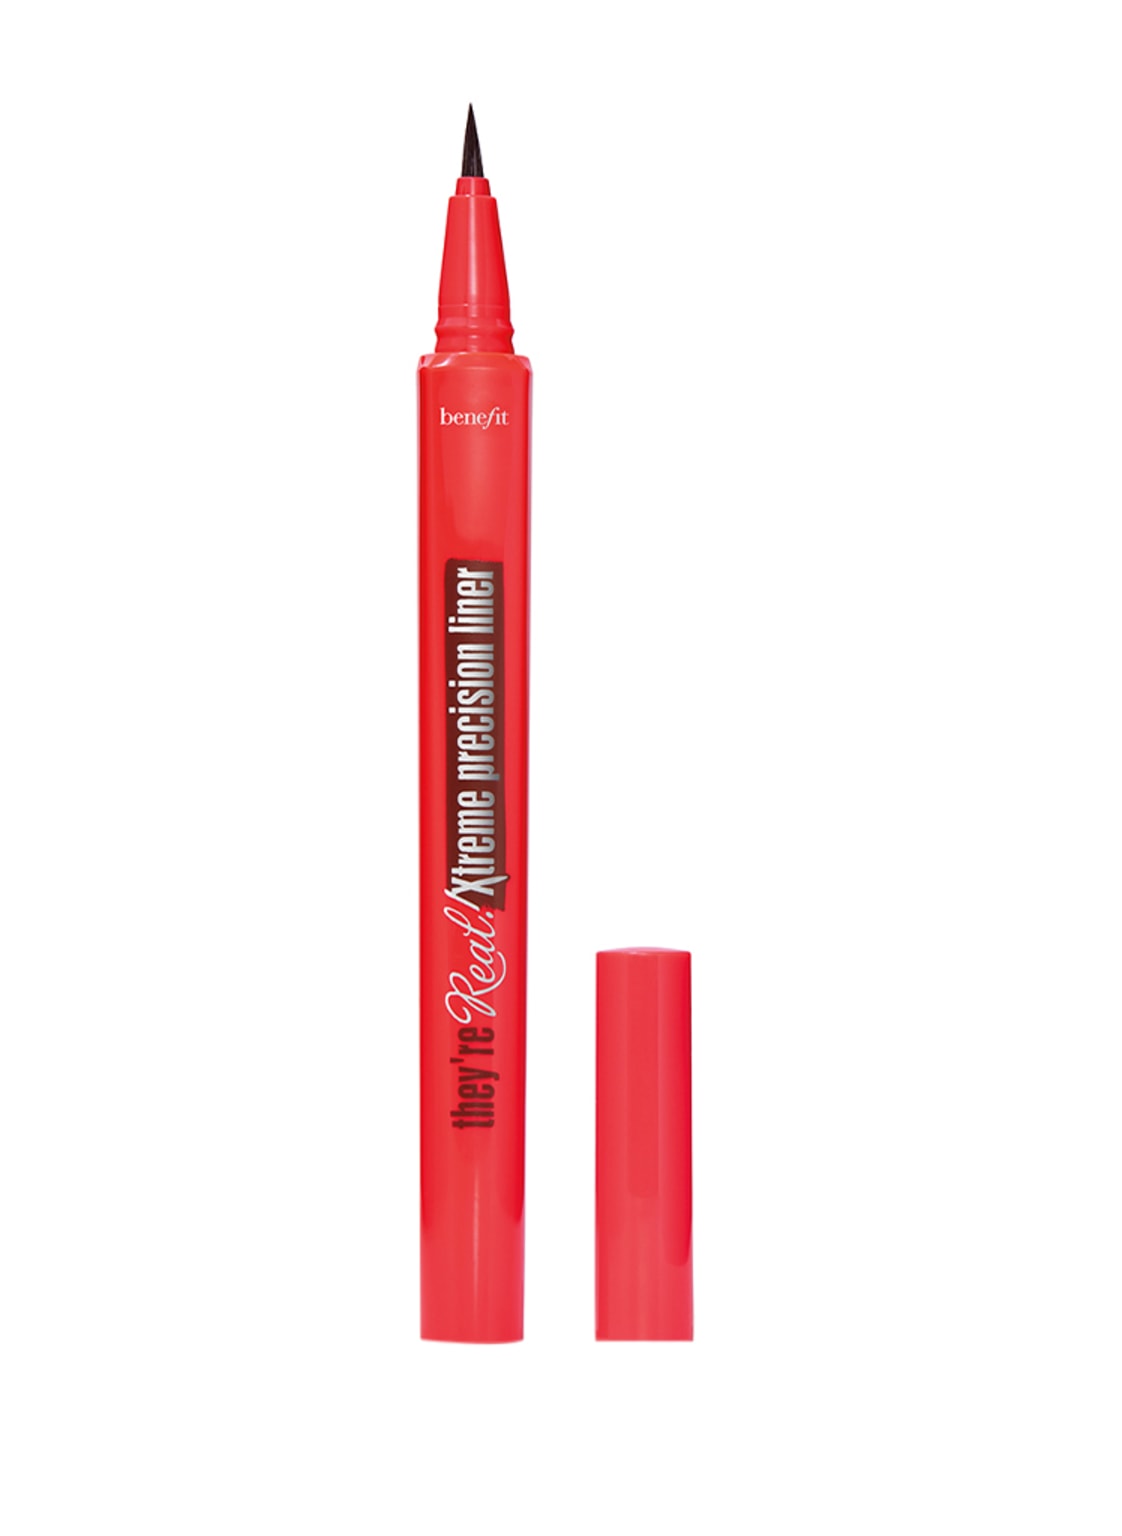 Benefit They're Real Xtreme Precision Liner Eyeliner von Benefit